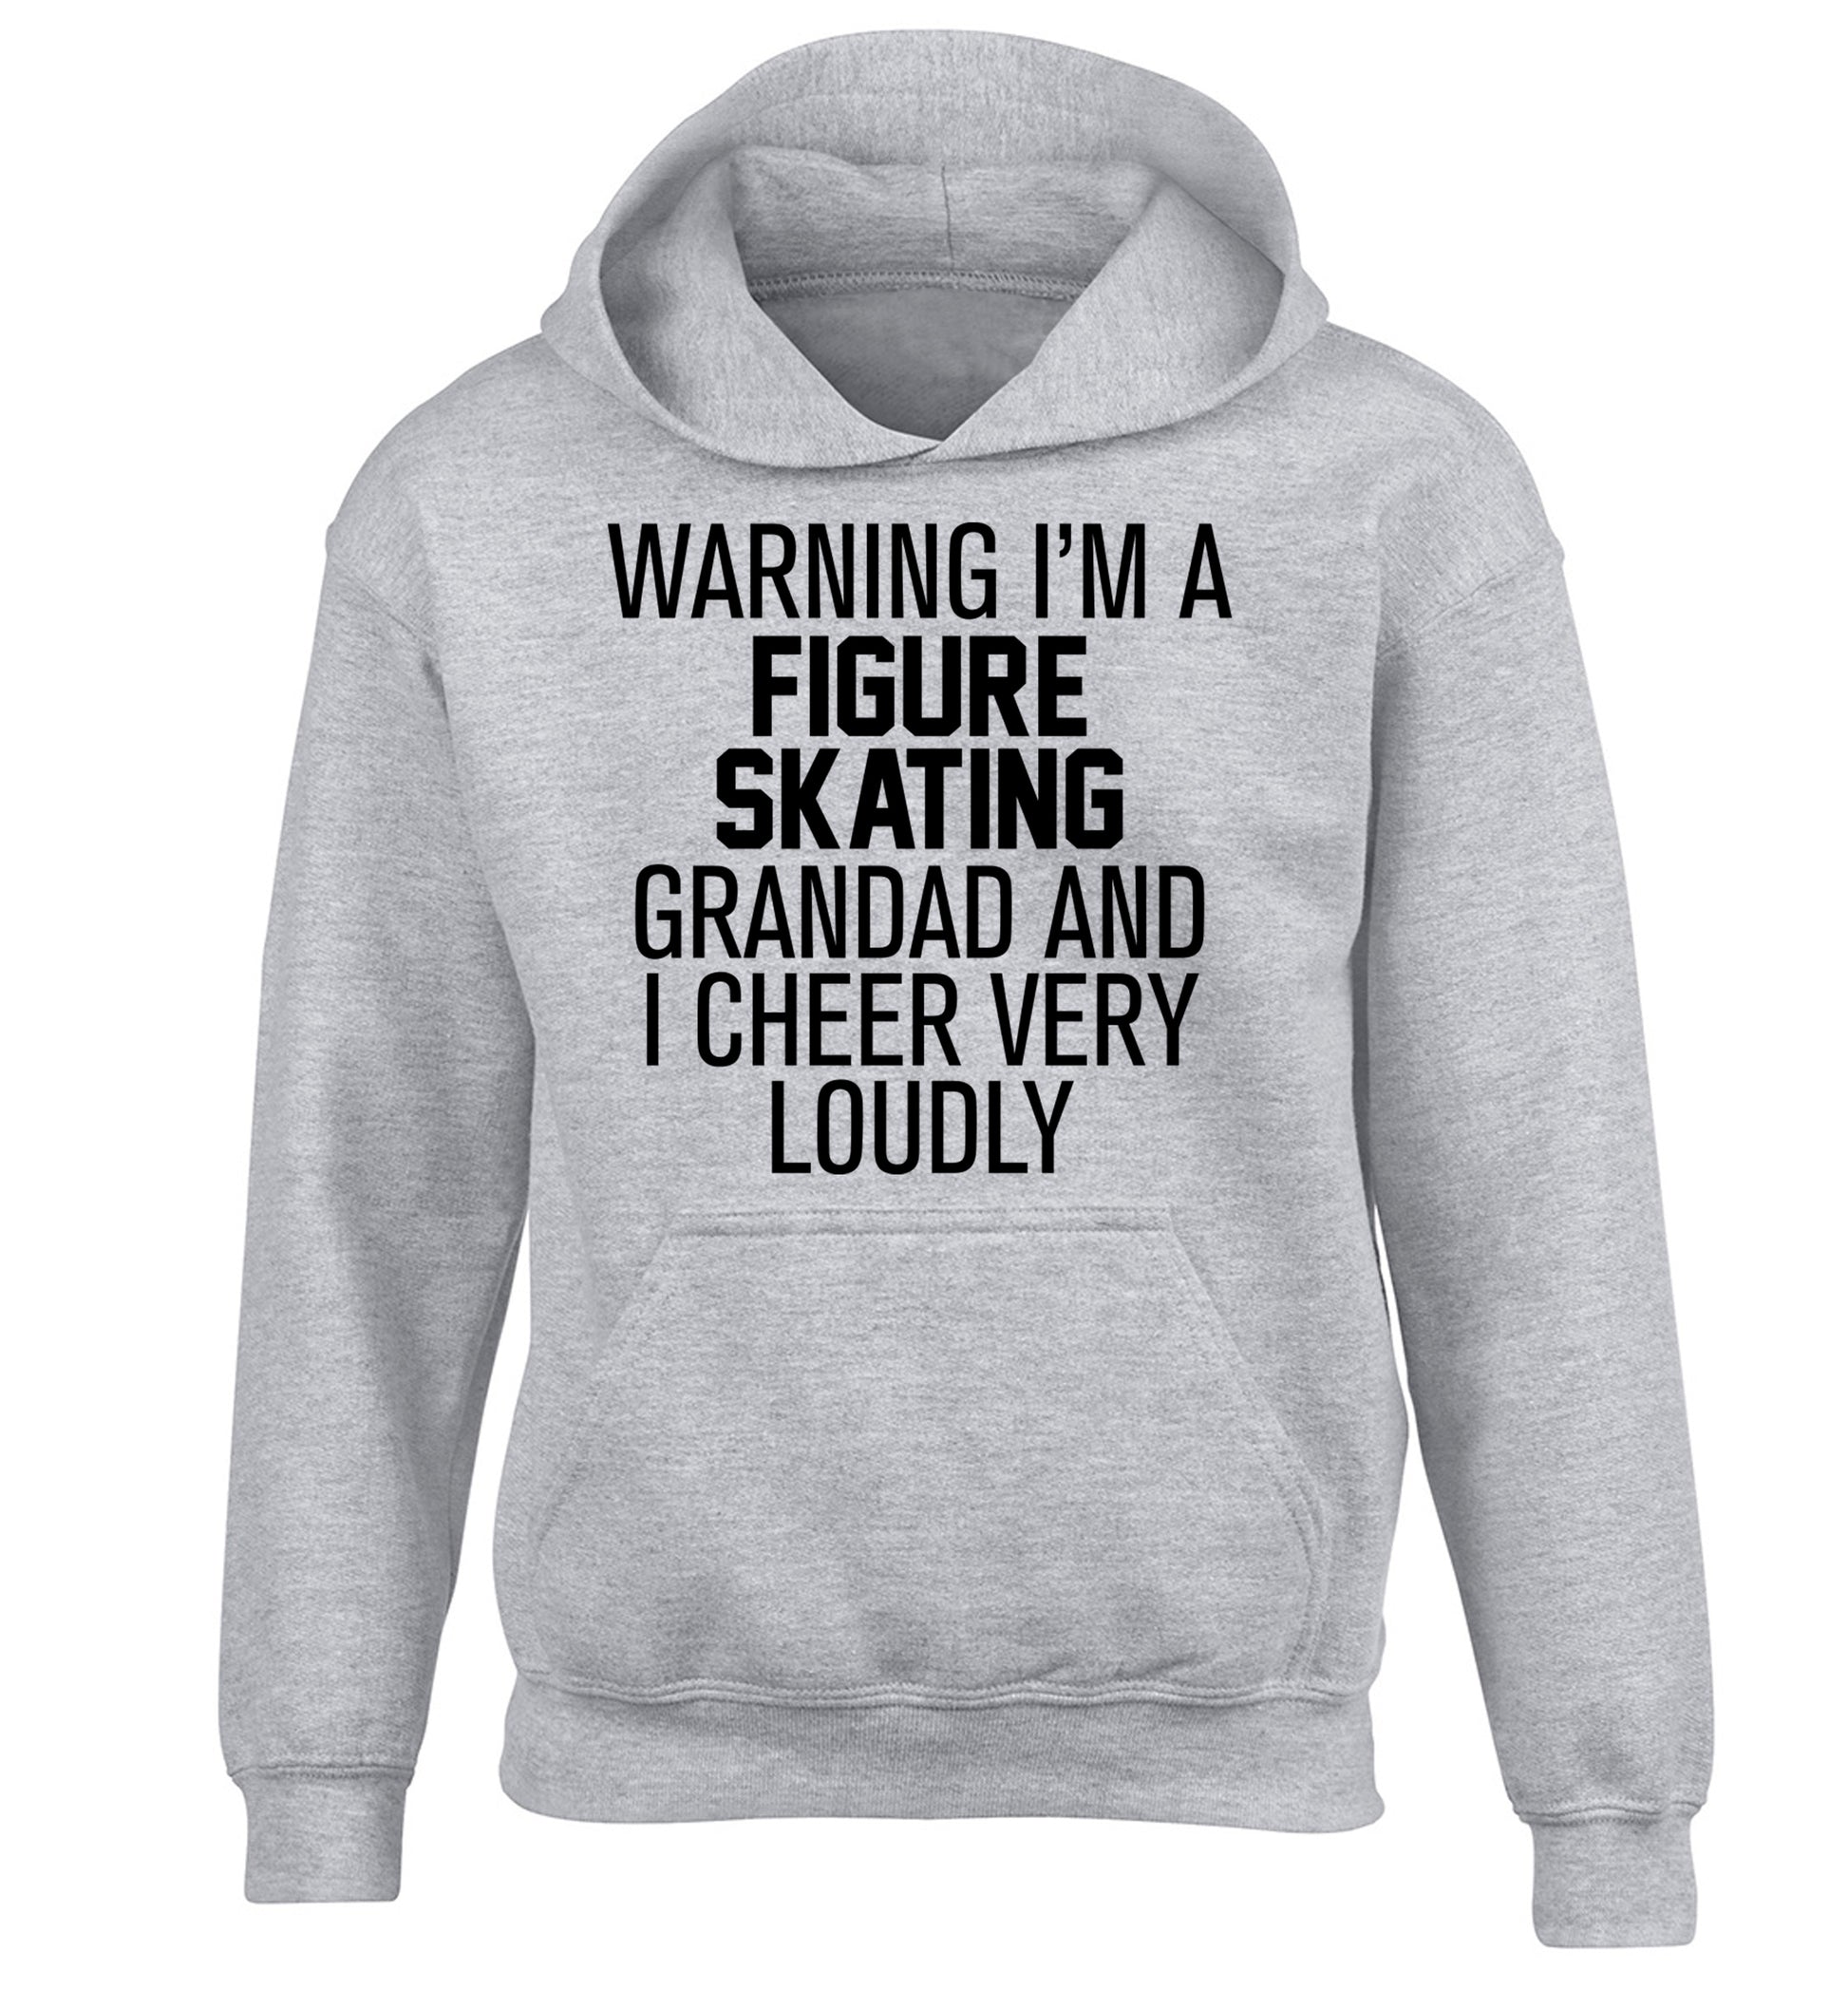 Warning I'm a figure skating grandad and I cheer very loudly children's grey hoodie 12-14 Years